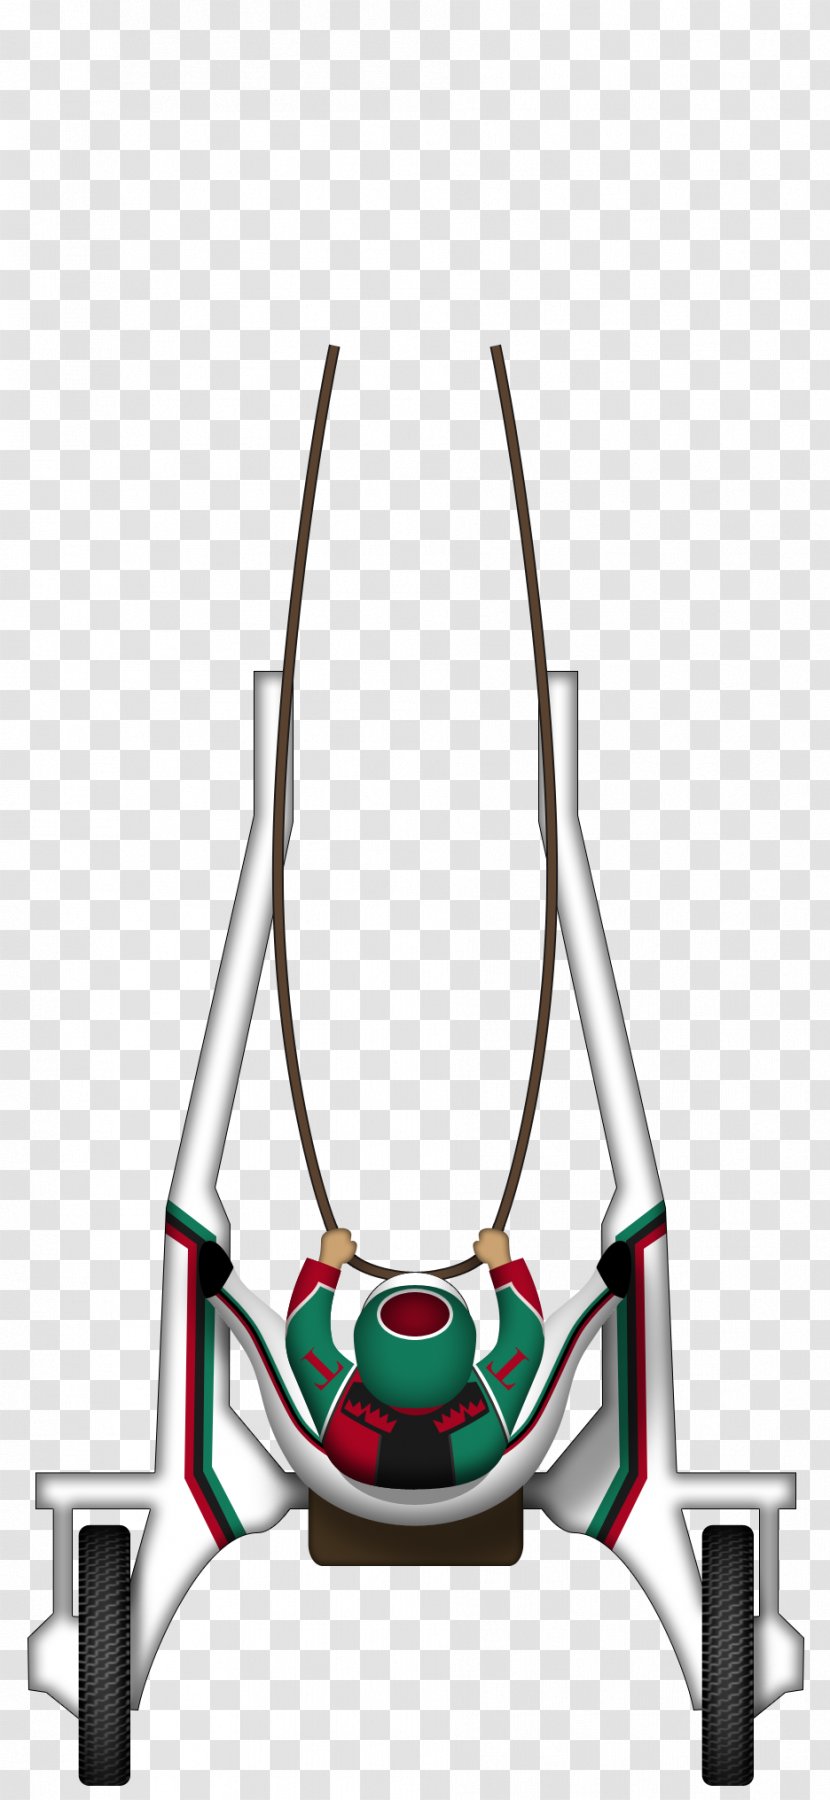 Horse Racing Vacuum Cleaner Harness - Sports Equipment - Gustave Jacquet Transparent PNG